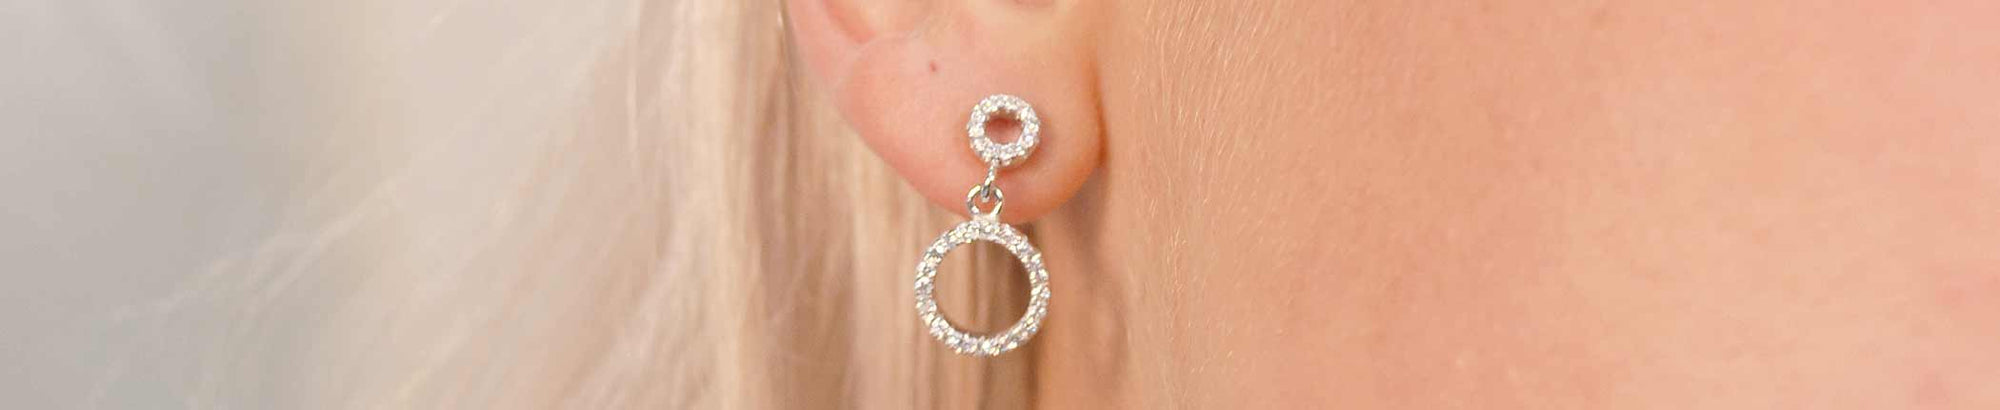 <font color=#000000>How to look after cubic zirconia earrings</font>